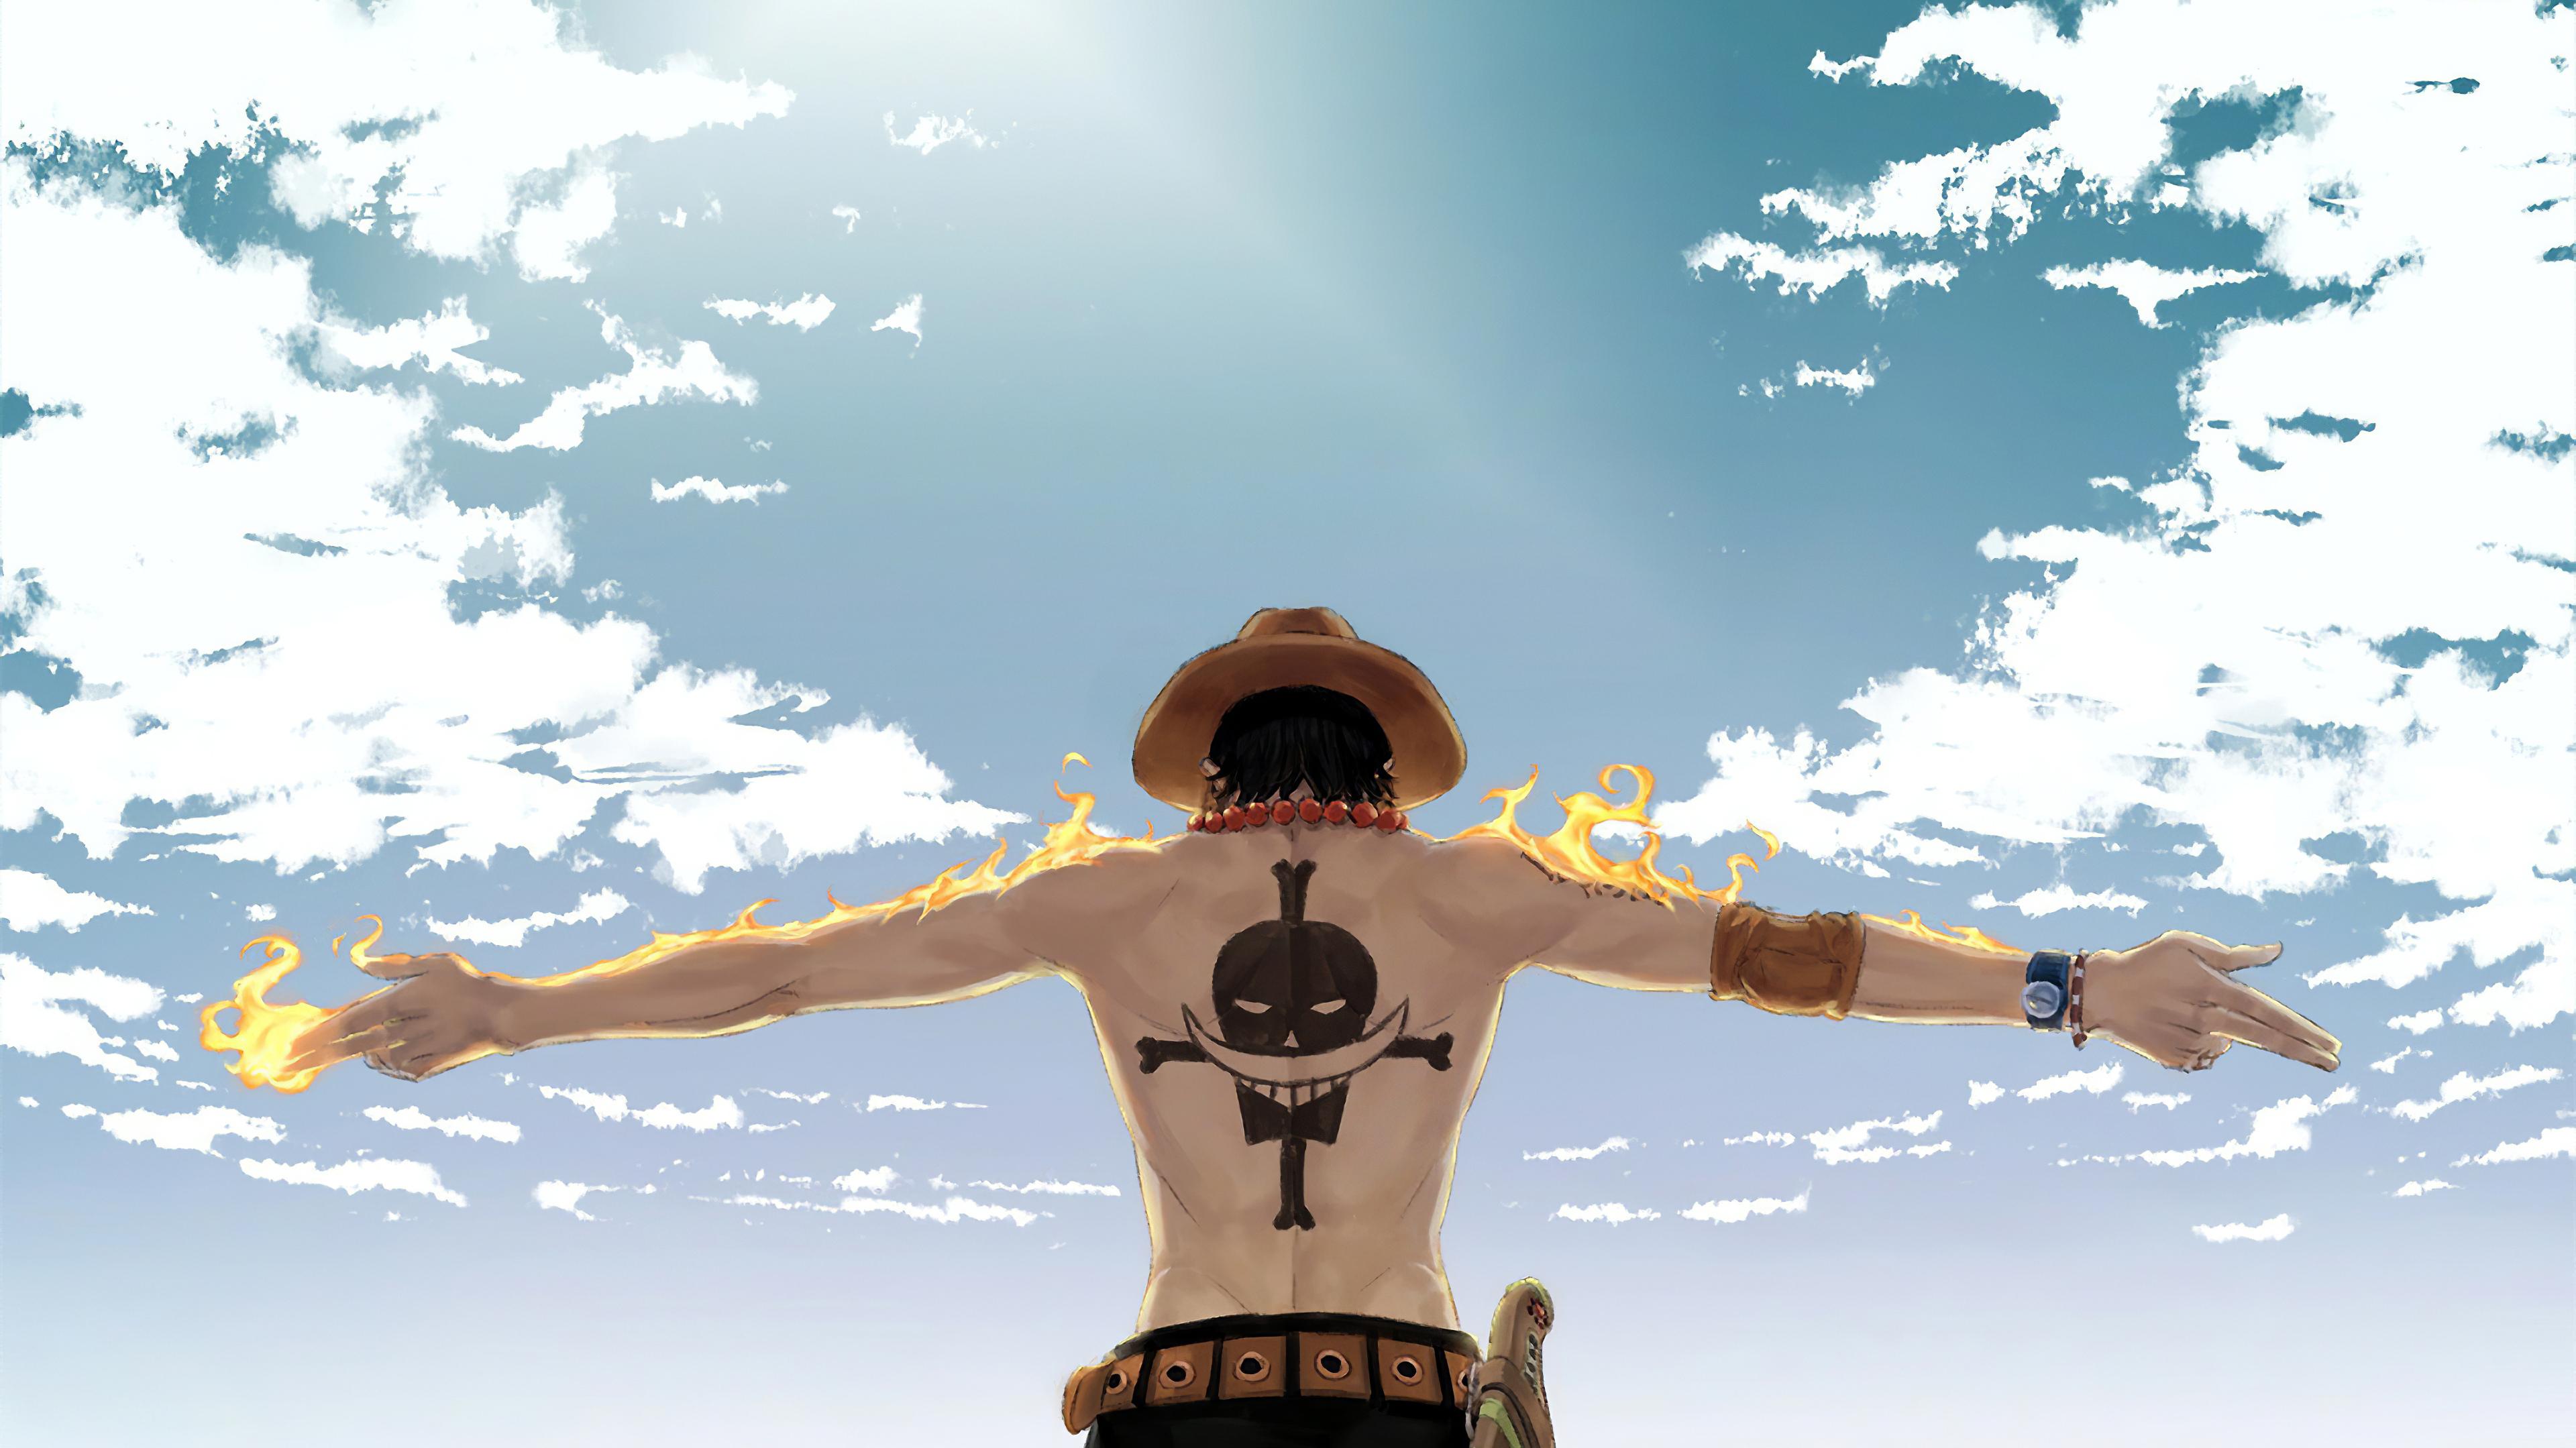 One Piece 4k HD Wallpaper Image Background